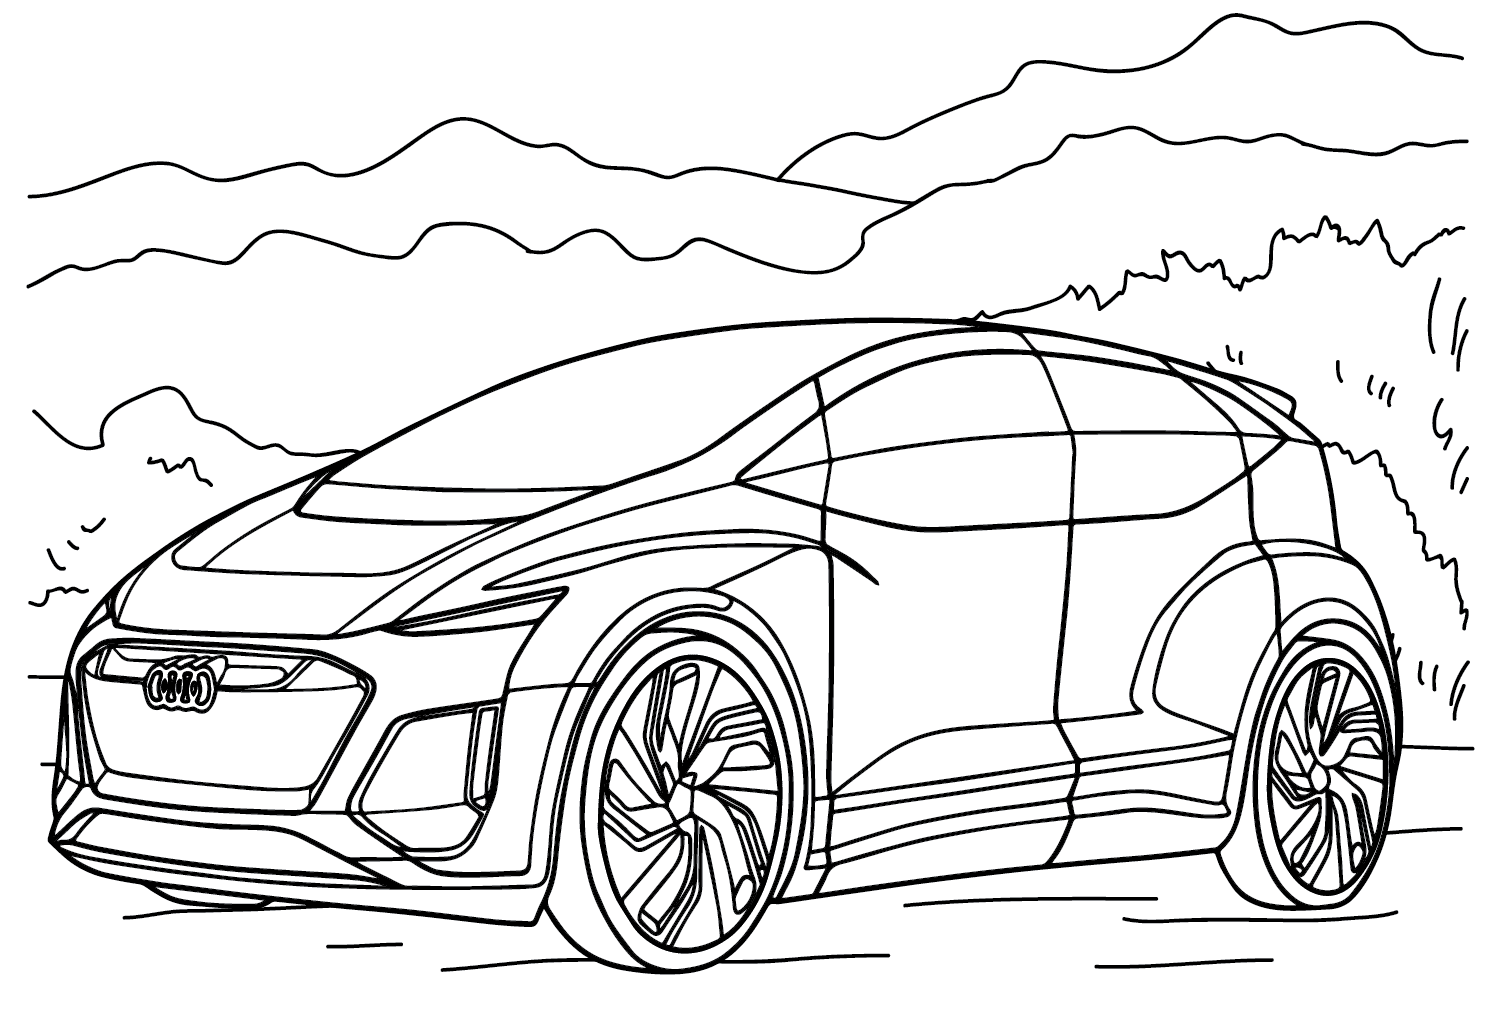 Audi Car Coloring Page from Audi